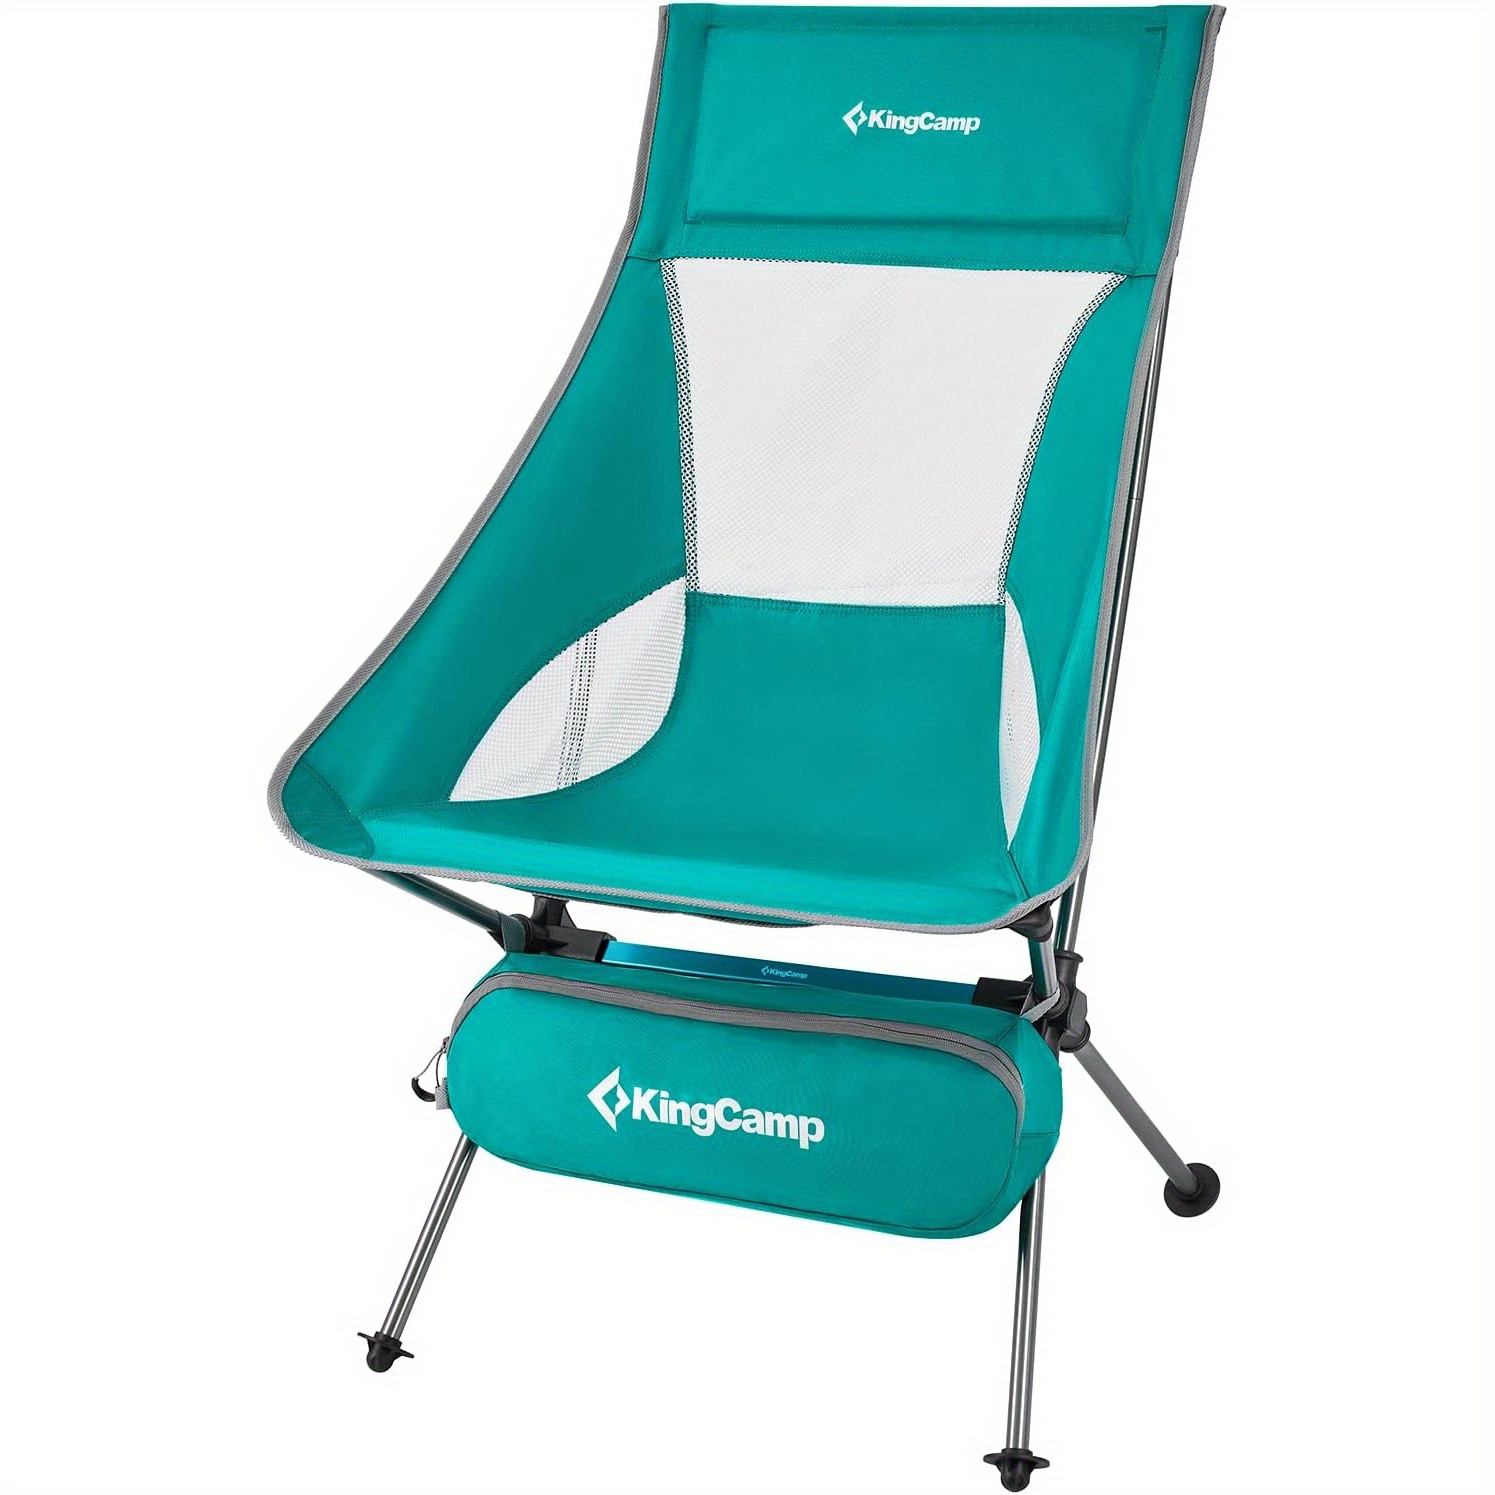 

Kingcamp Extra Wide Lightweight High Back Compact Folding Chair With Headrest; Side Pocket; Carry Bag, Heavy Duty 330lbs, Portable For Camping, Traveling, Picnic, Fishing, Cyan